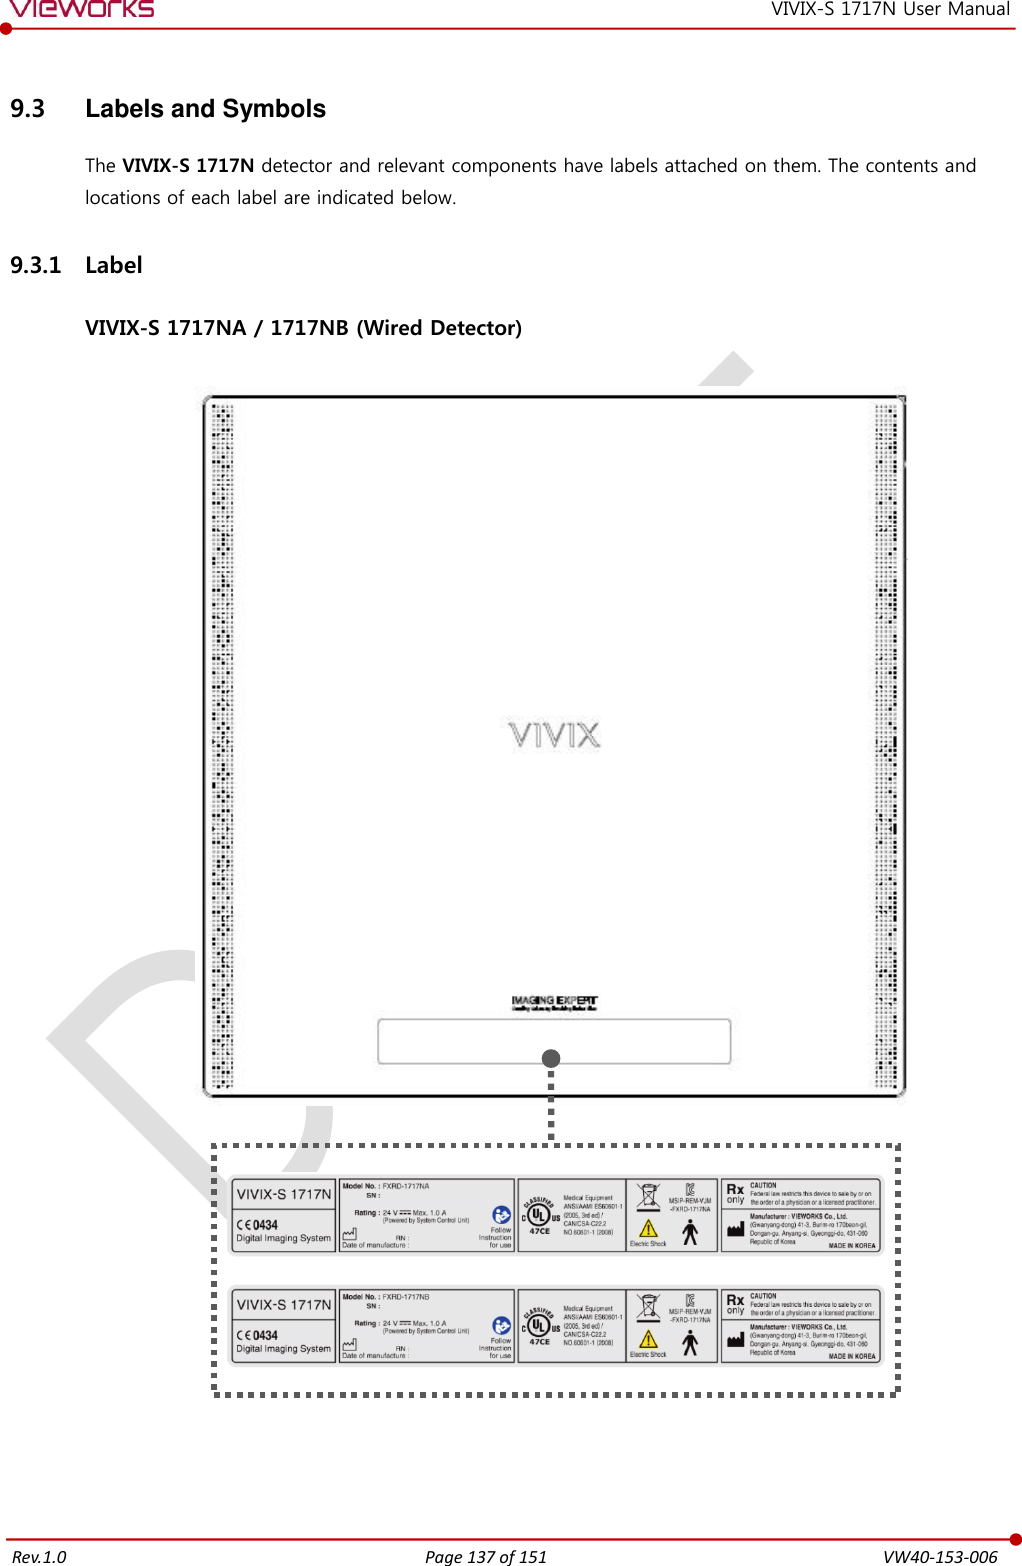   Rev.1.0 Page 137 of 151  VW40-153-006 VIVIX-S 1717N User Manual 9.3  Labels and Symbols The VIVIX-S 1717N detector and relevant components have labels attached on them. The contents and locations of each label are indicated below. 9.3.1 Label  VIVIX-S 1717NA / 1717NB (Wired Detector)               